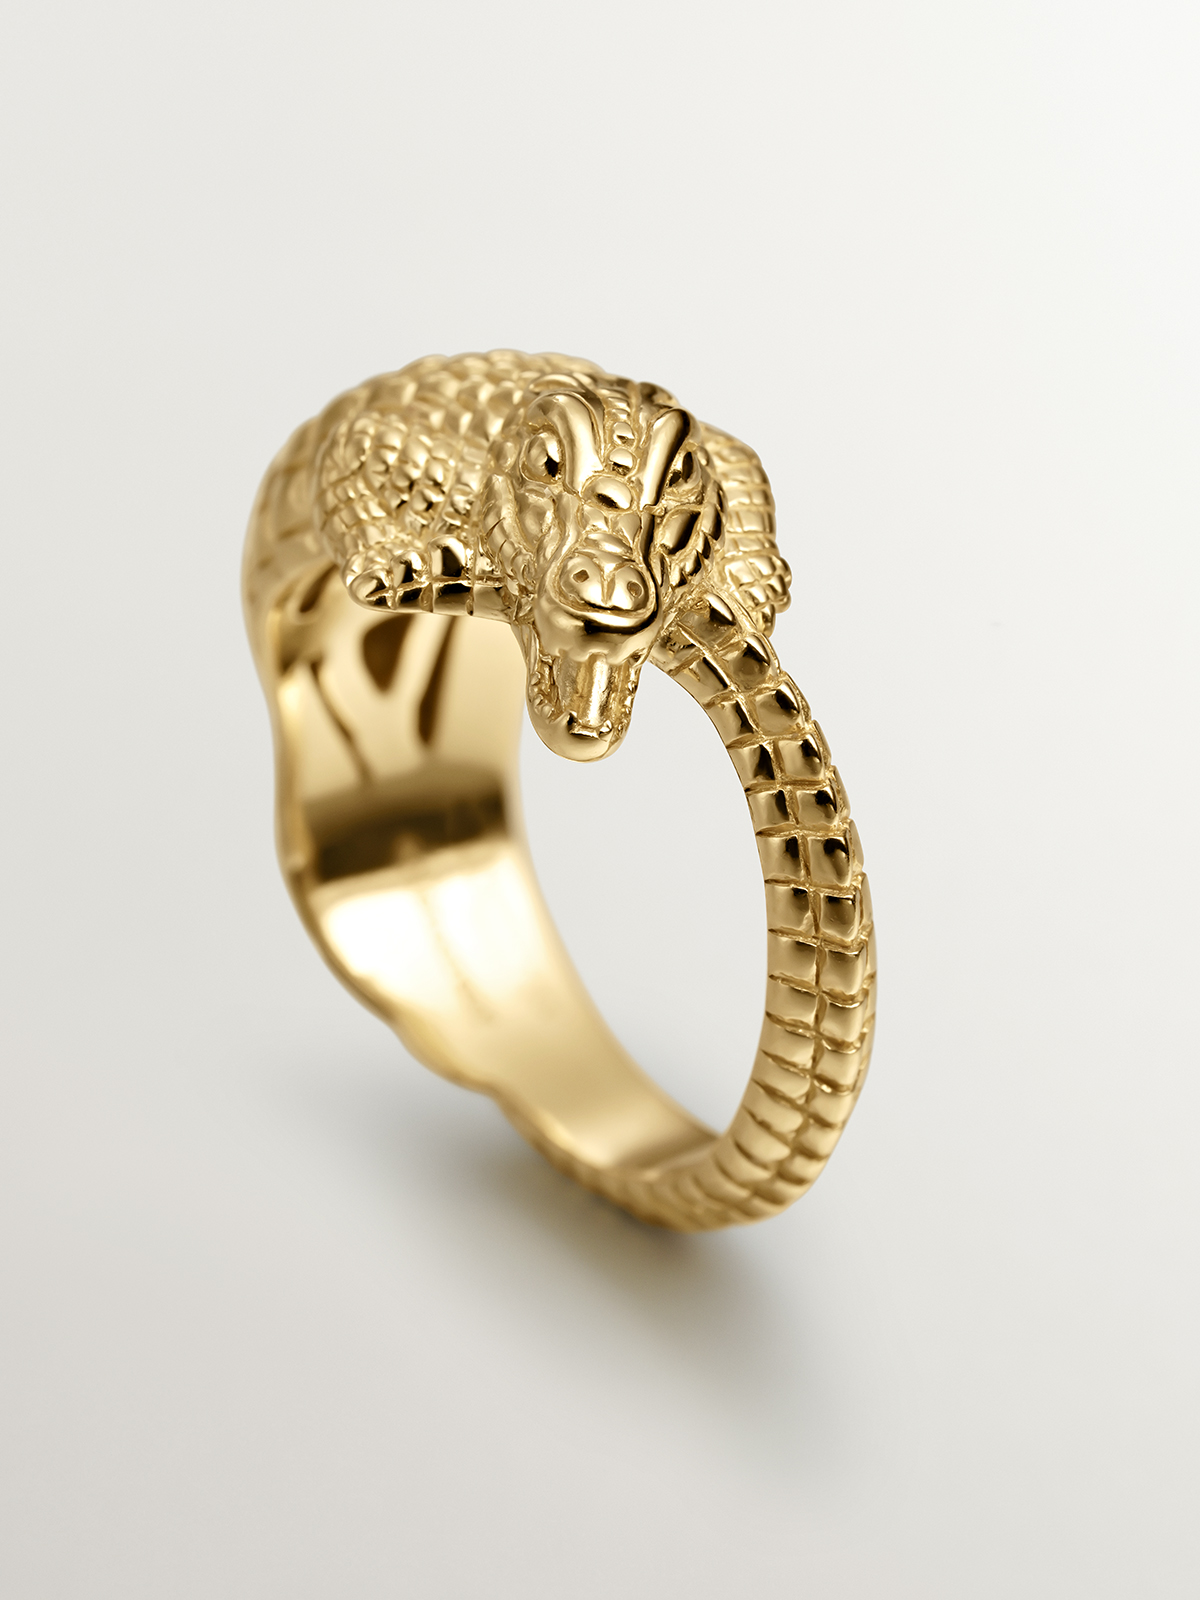 925 silver ring in 18K yellow gold with crocodile shape